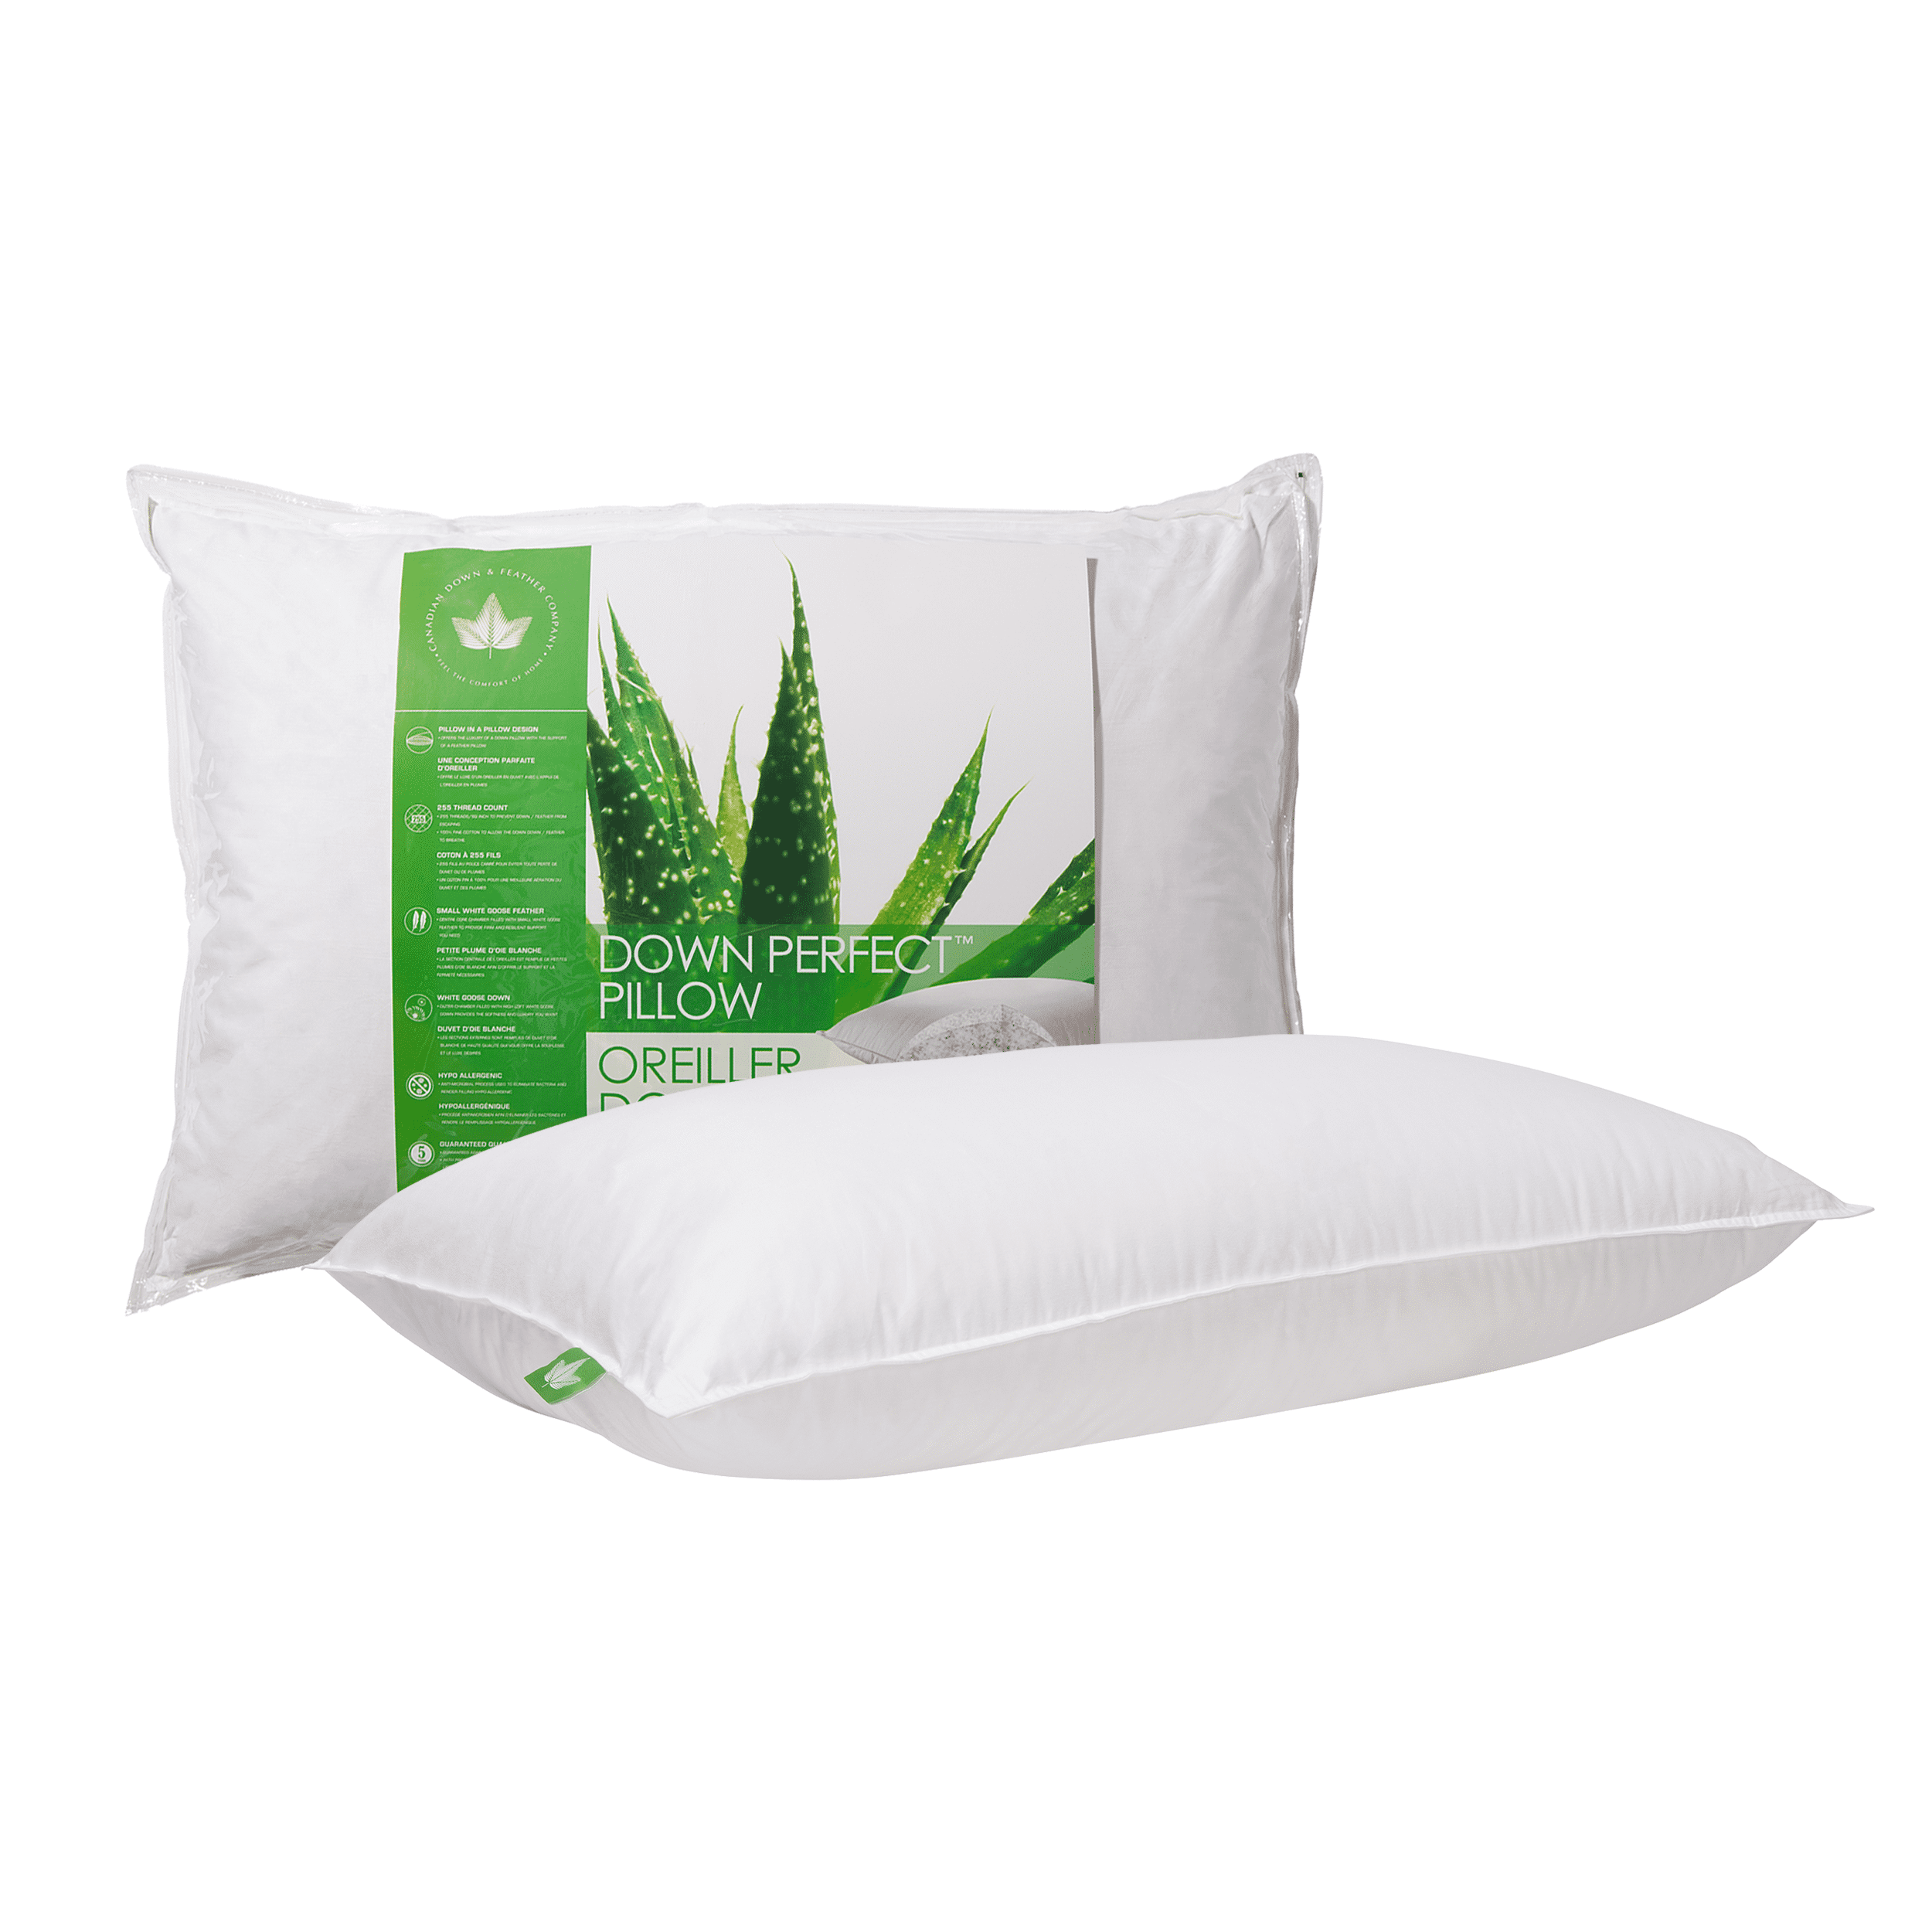 Down Perfect Pillow - Firm Support - Standard Size